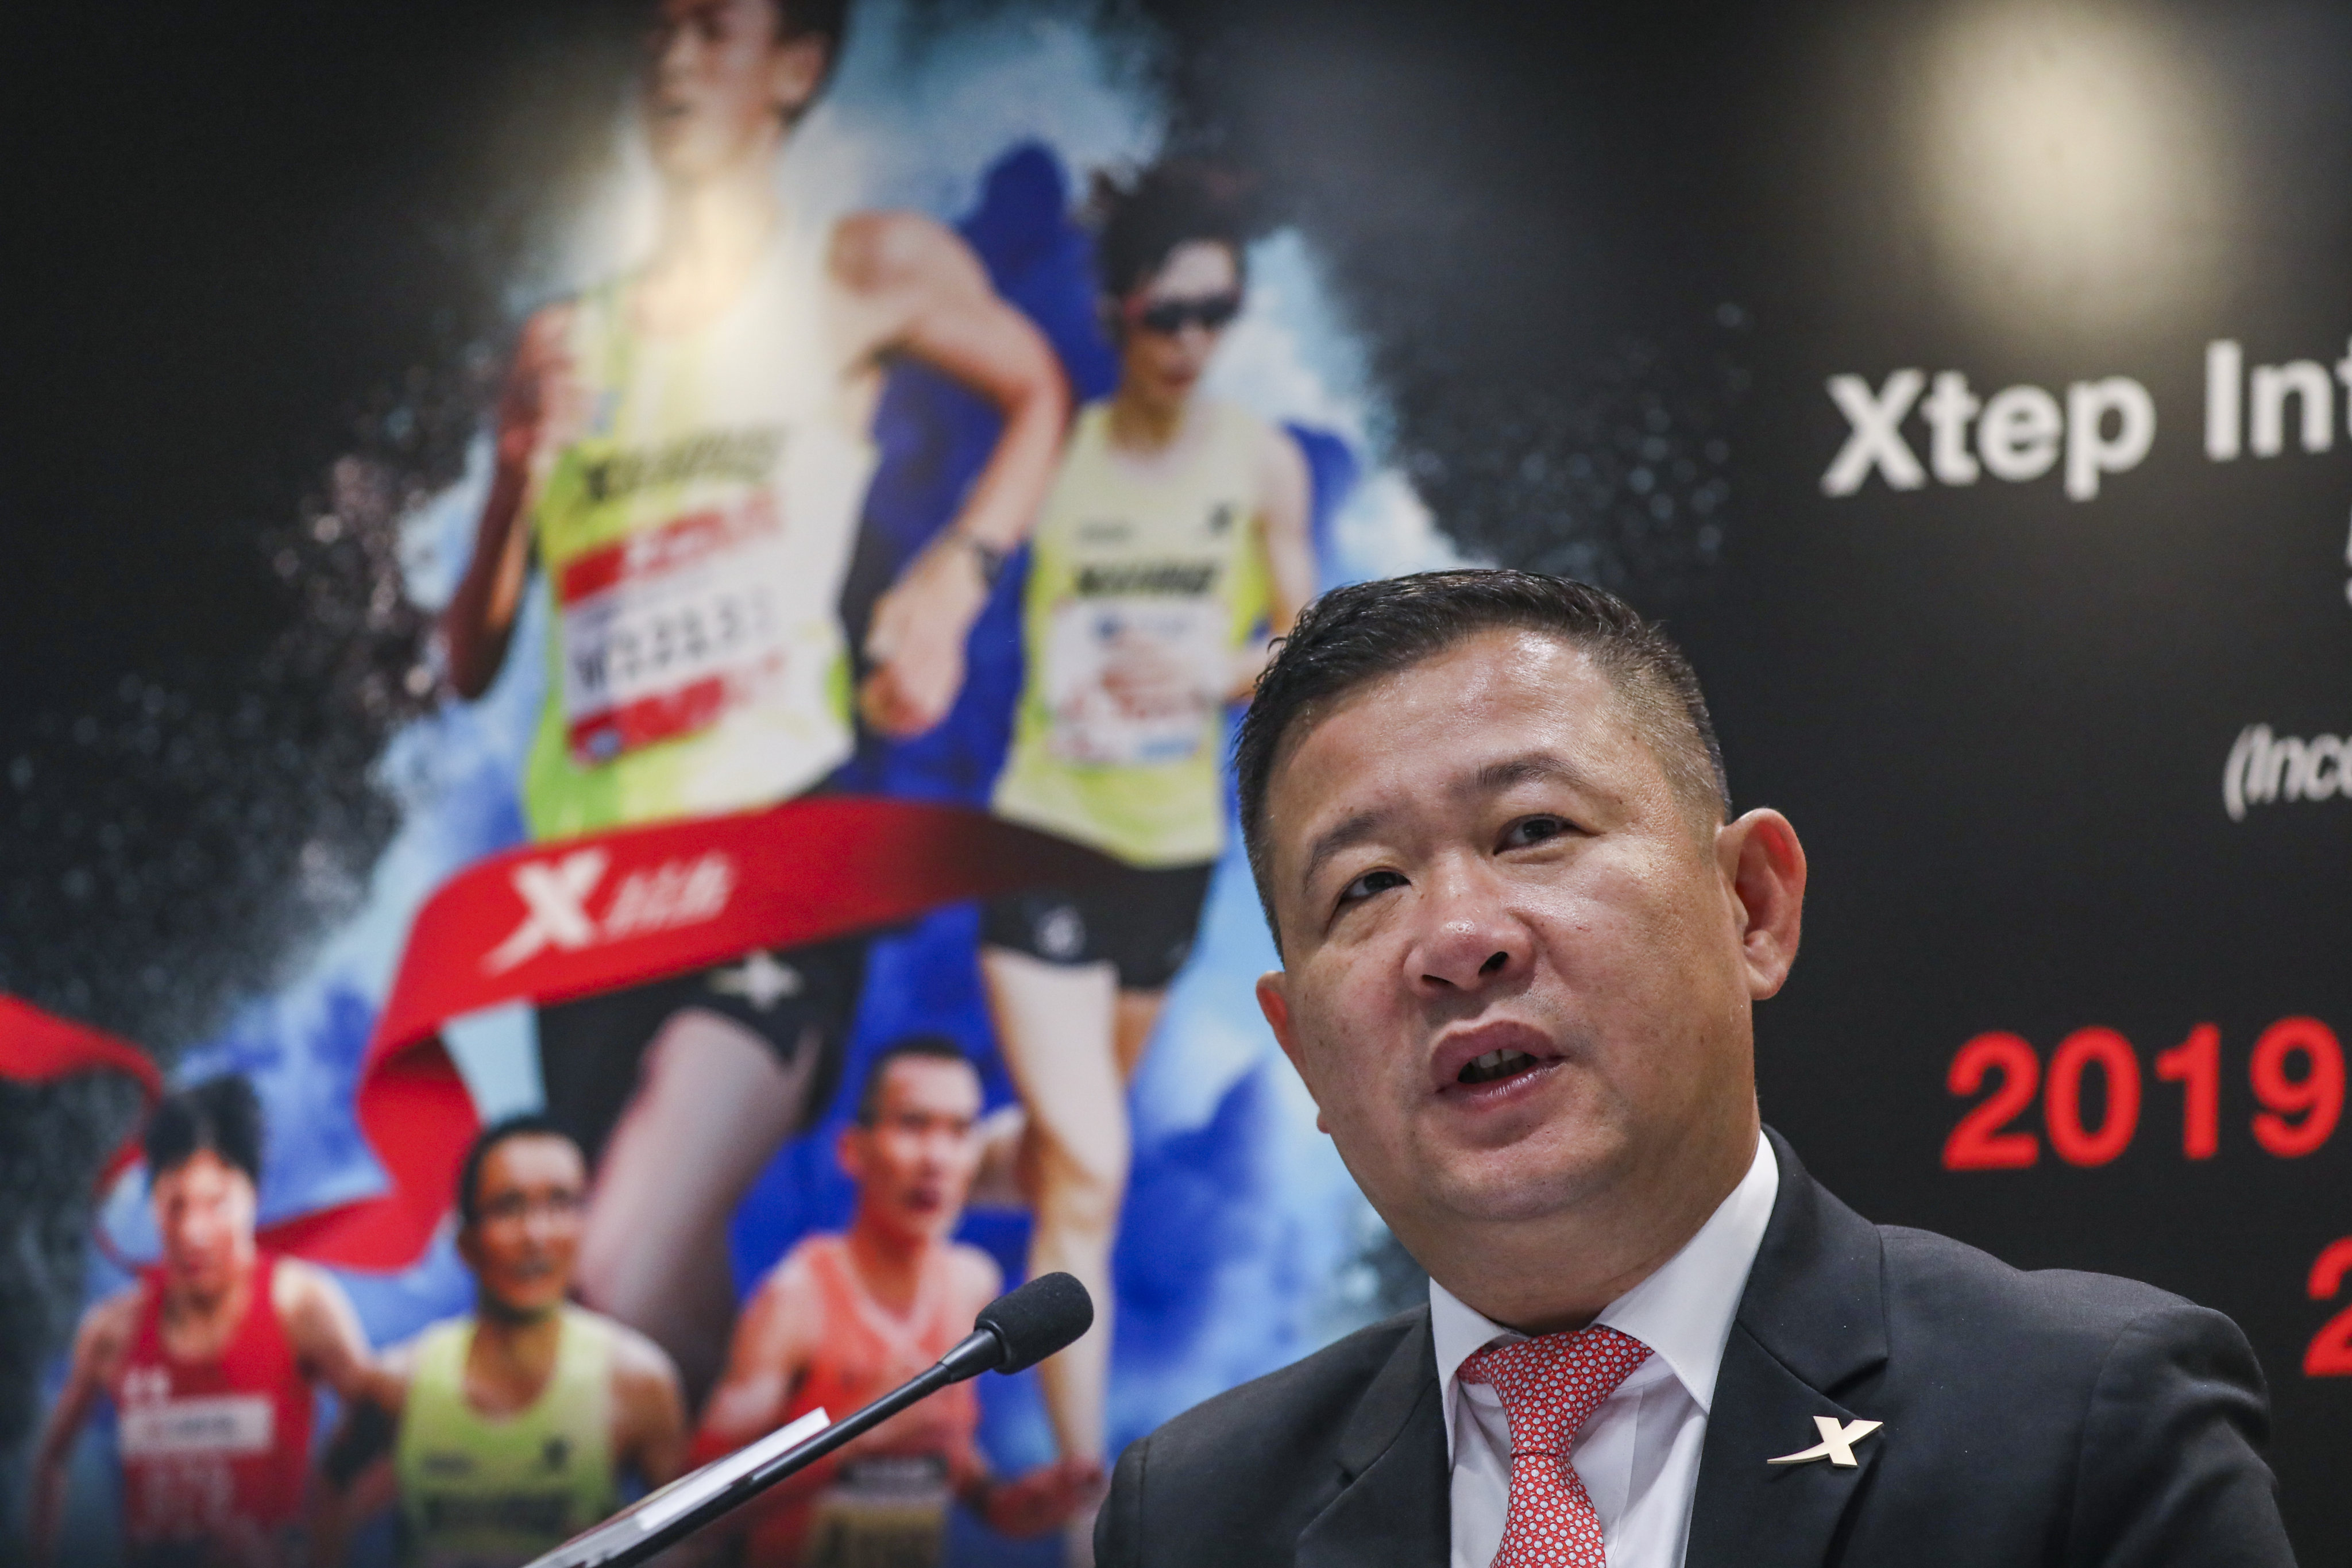 Ding Shui Po, Chairman and Chief Executive Officer of Xtep International. Photo: Nora Tam